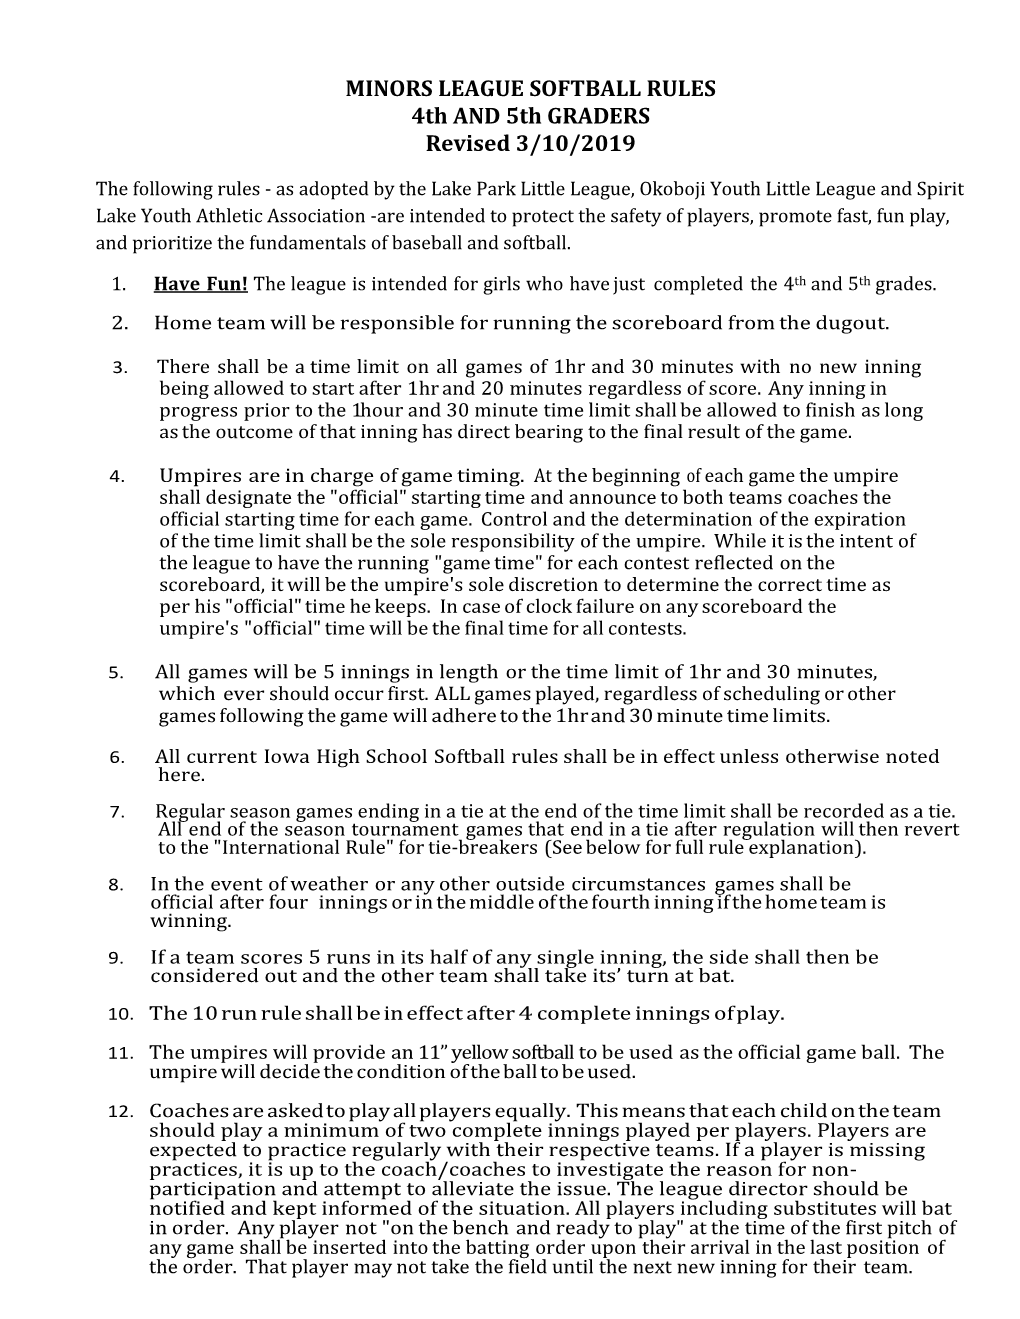 MINORS LEAGUE SOFTBALL RULES 4Th and 5Th GRADERS Revised 3/10/2019